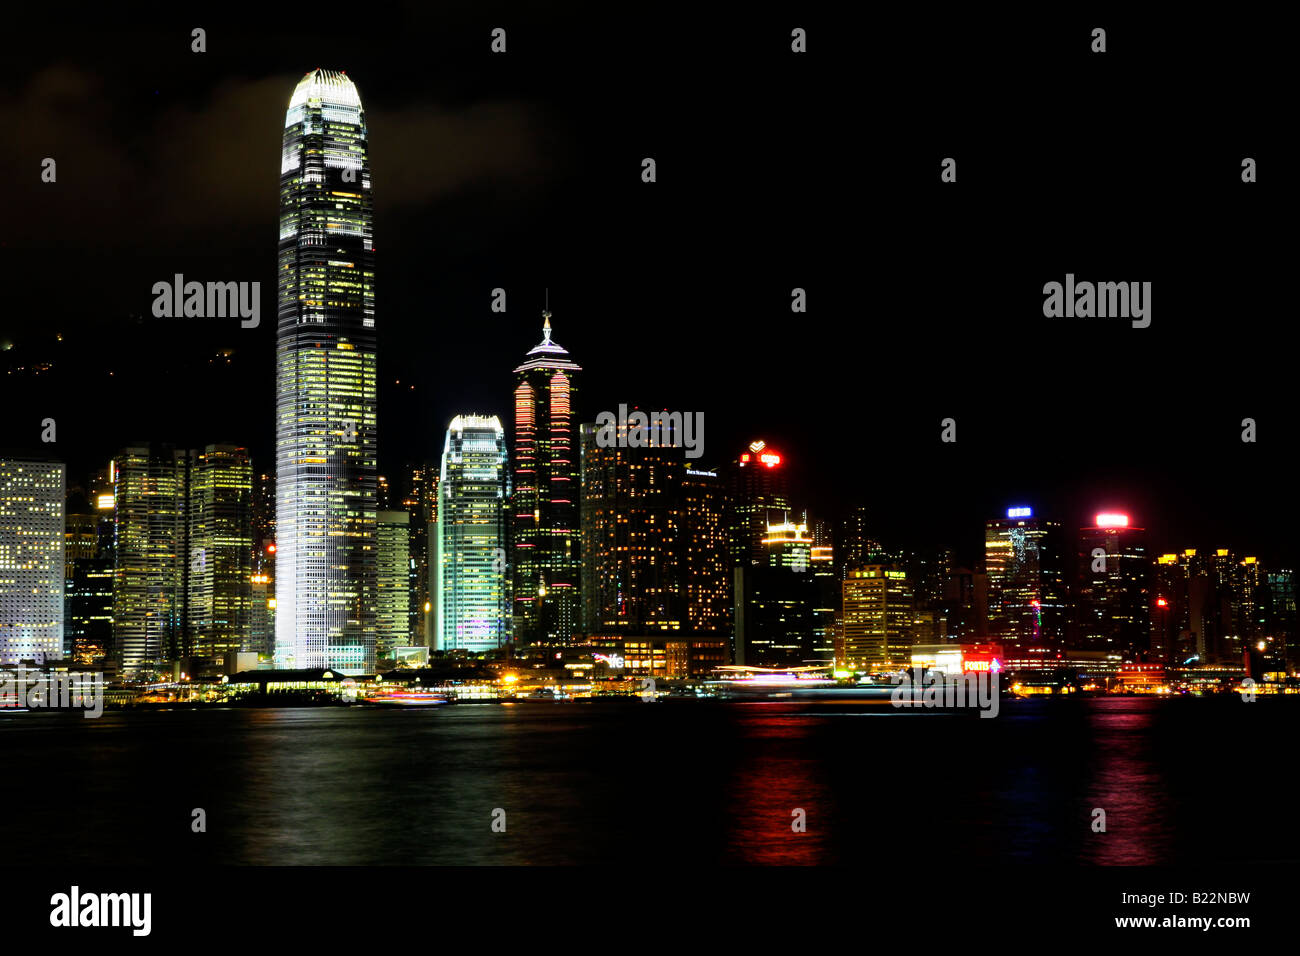 Hong Kong Island skyline at night with illuminated buildings and prominent IFC tower, viewed from the Kowloon mainland Stock Photo